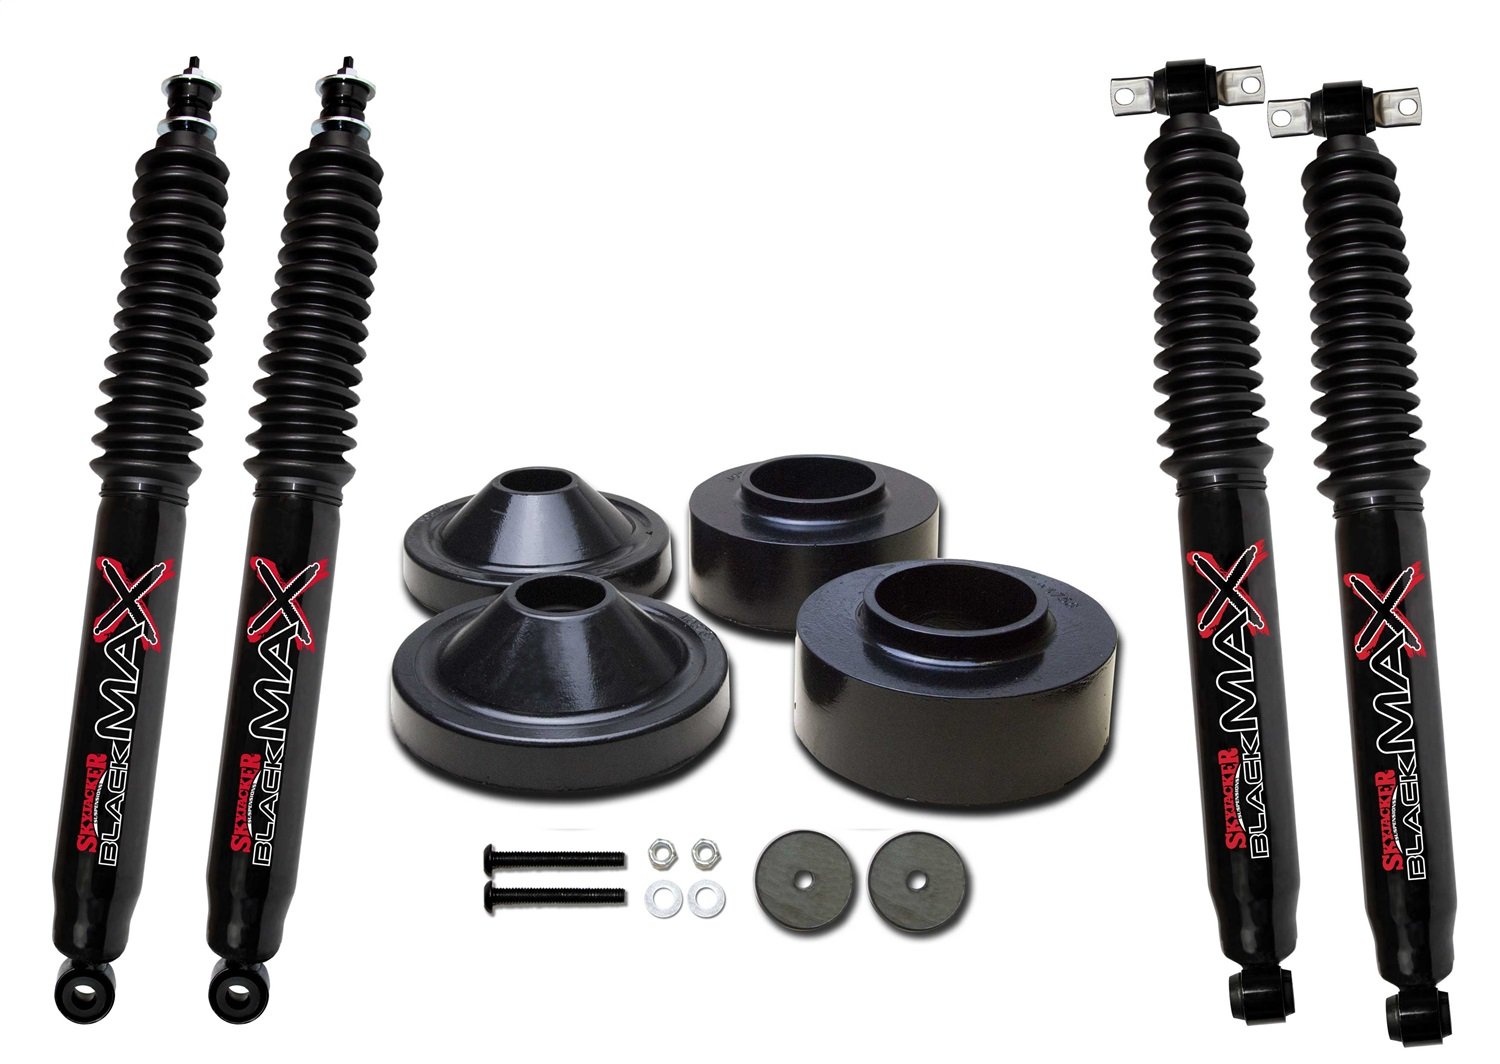 JK23-B Front and Rear Leveling Kit, Lift Amount: 2 in. Front/0.75 in. Rear